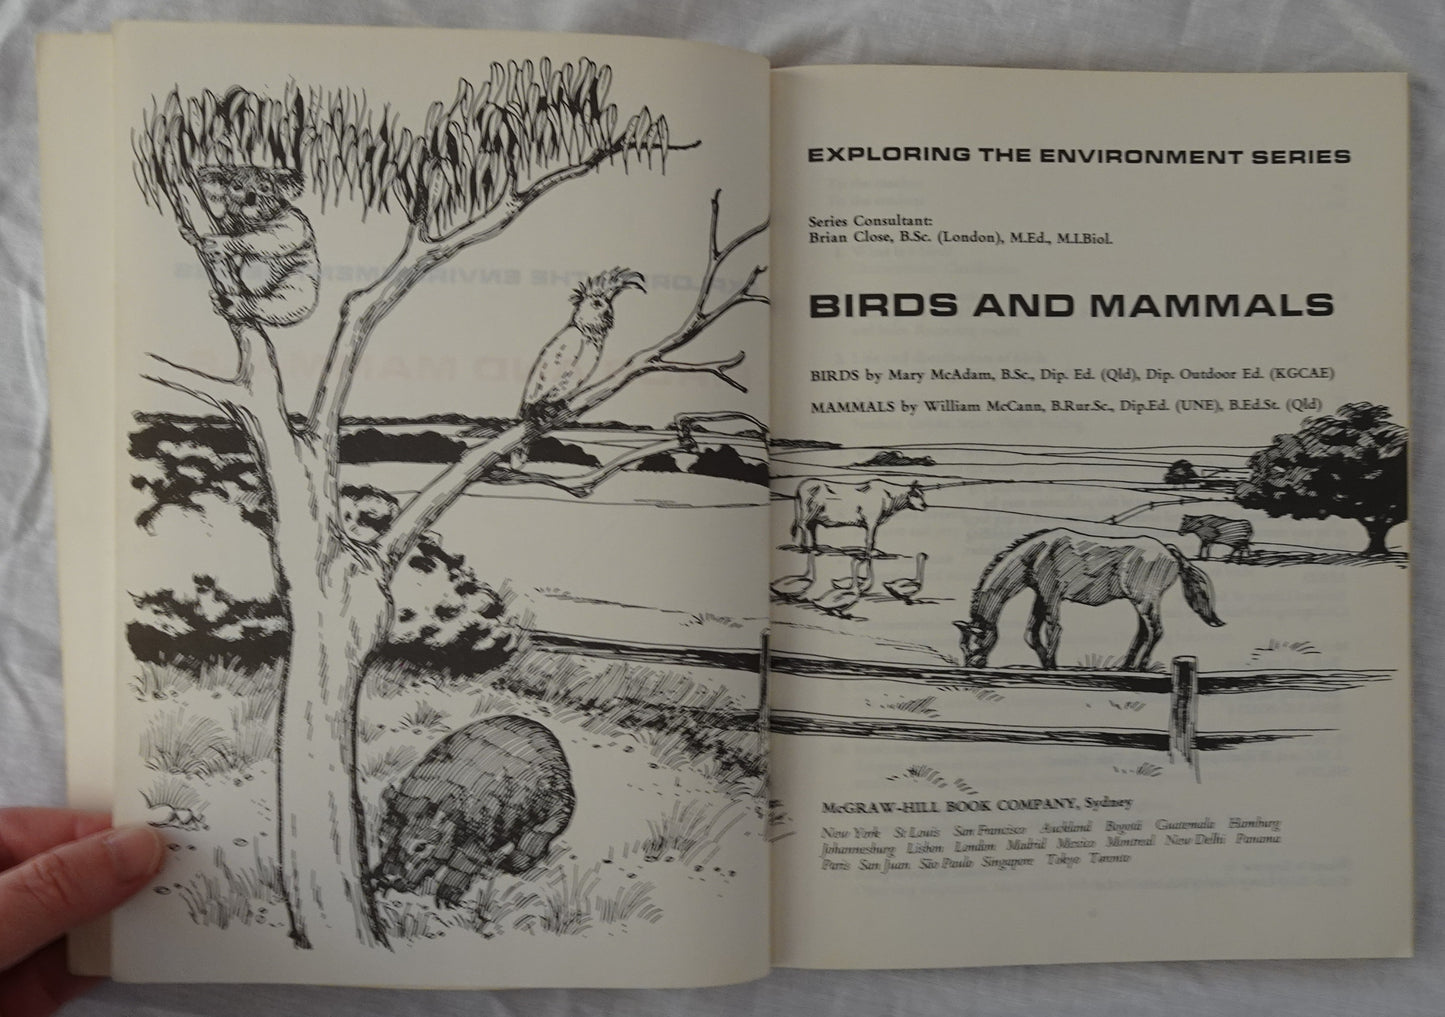 Birds and Mammals by Mary McAdam and William McCann